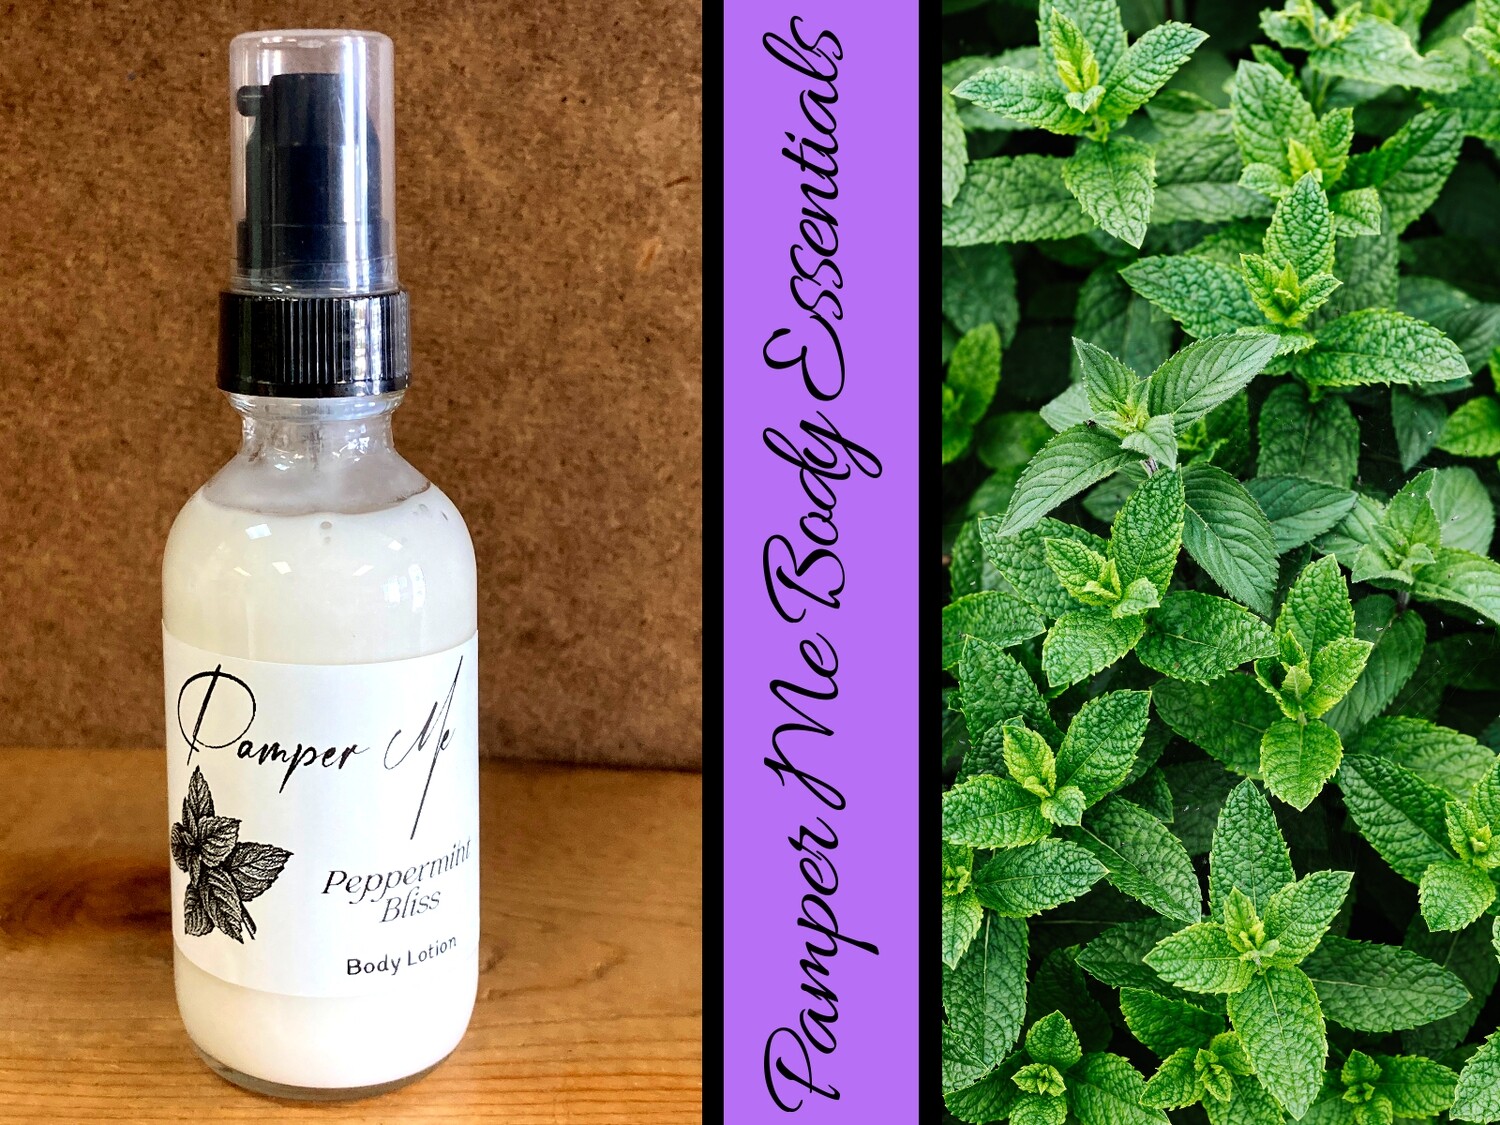 Peppermint bliss: Lotion